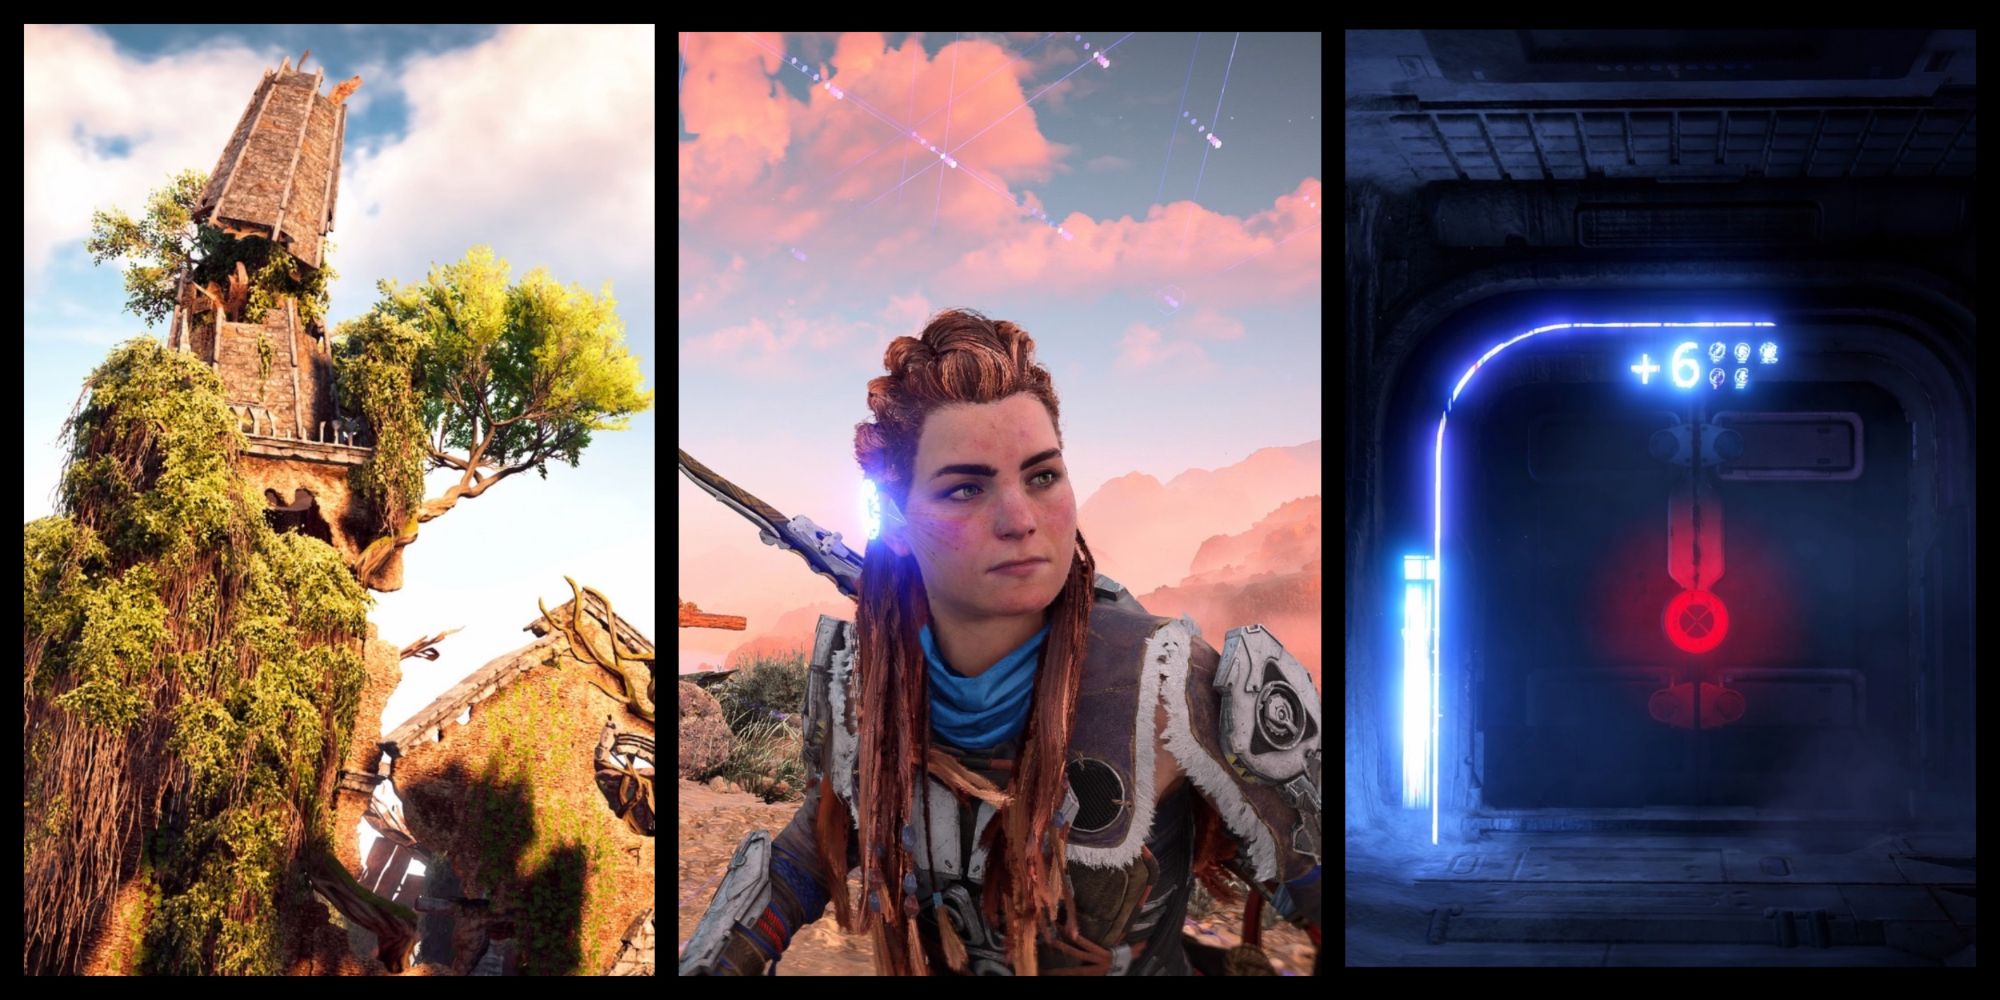 A city ruin on the left, Aloy in the center, and a neon-lit underground bunker to the right.